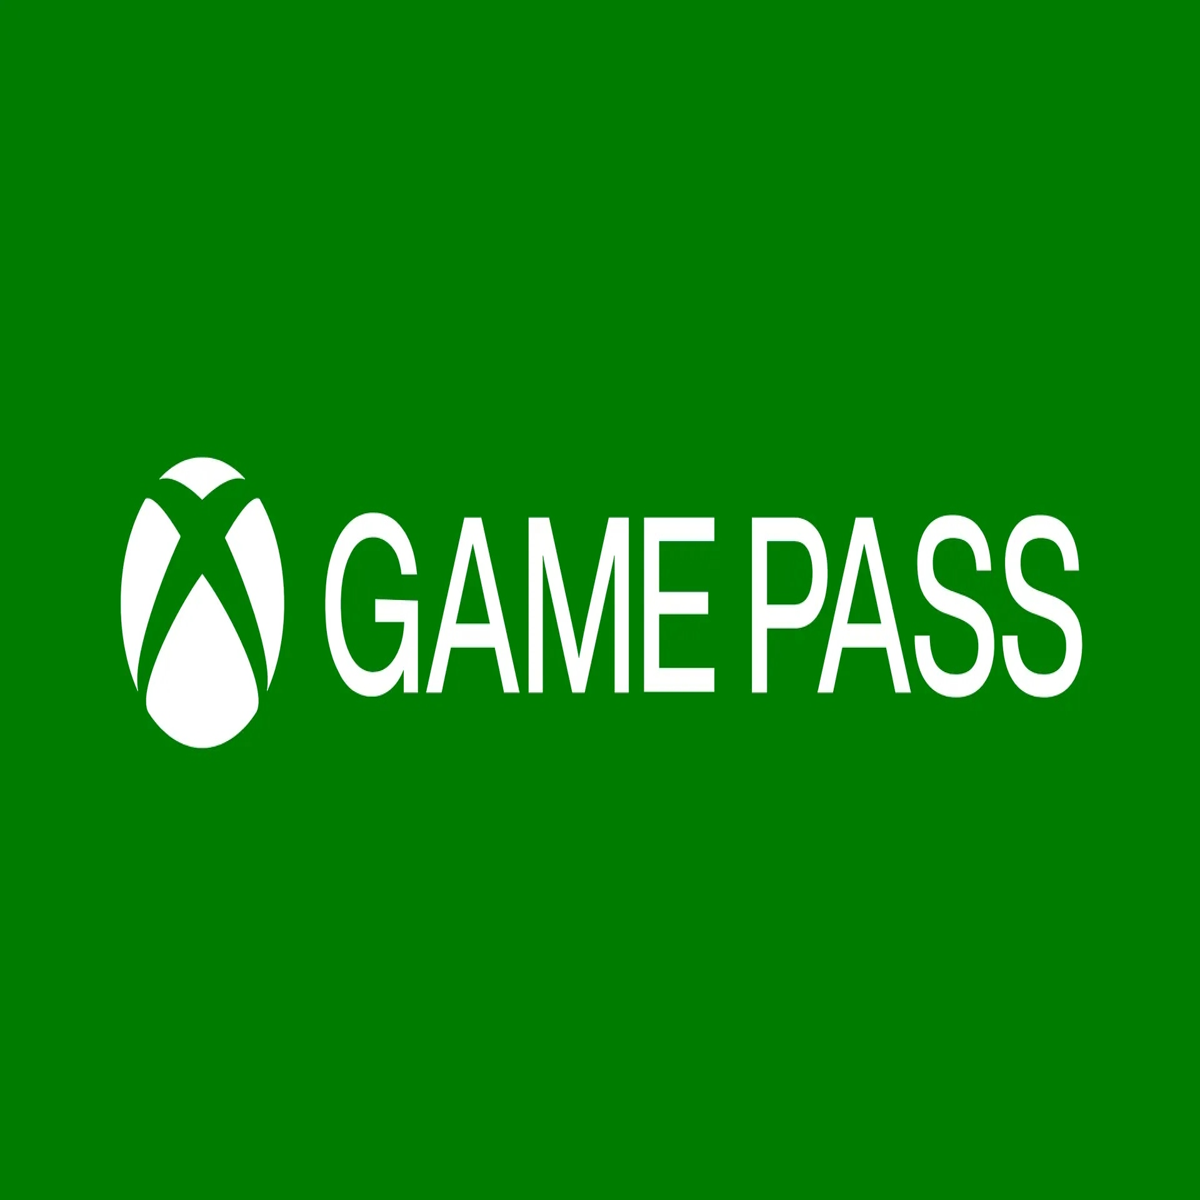 Xbox Game Pass Ultimate: Get one month of gaming access for just $1